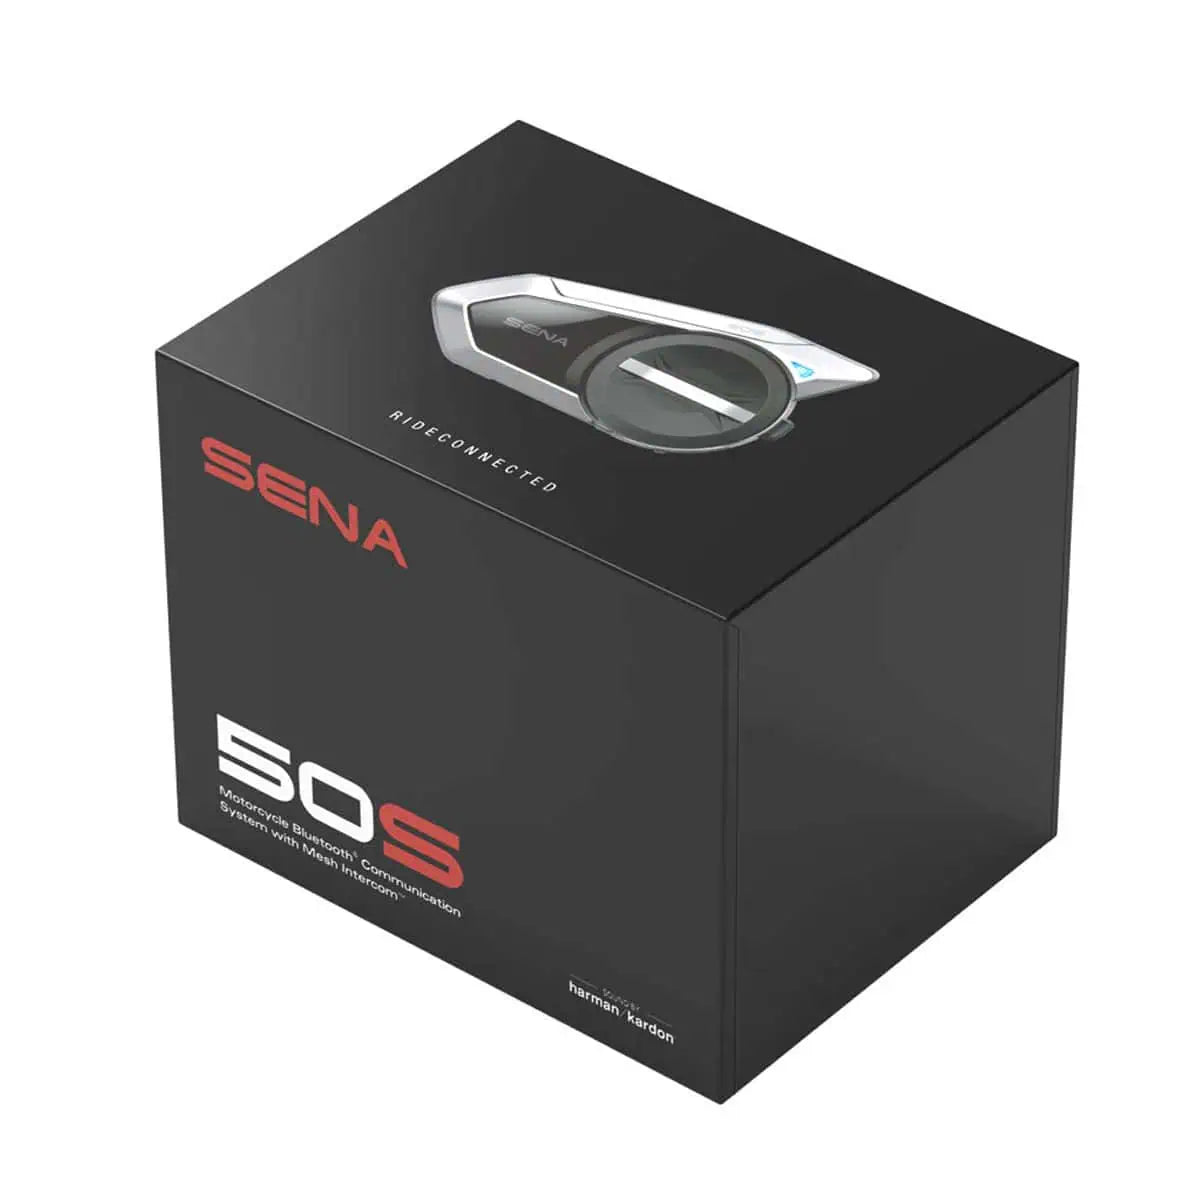 The Sena 50S Comms System: Get the unbeatable power of Sena's Mesh technology without any connection hiccups